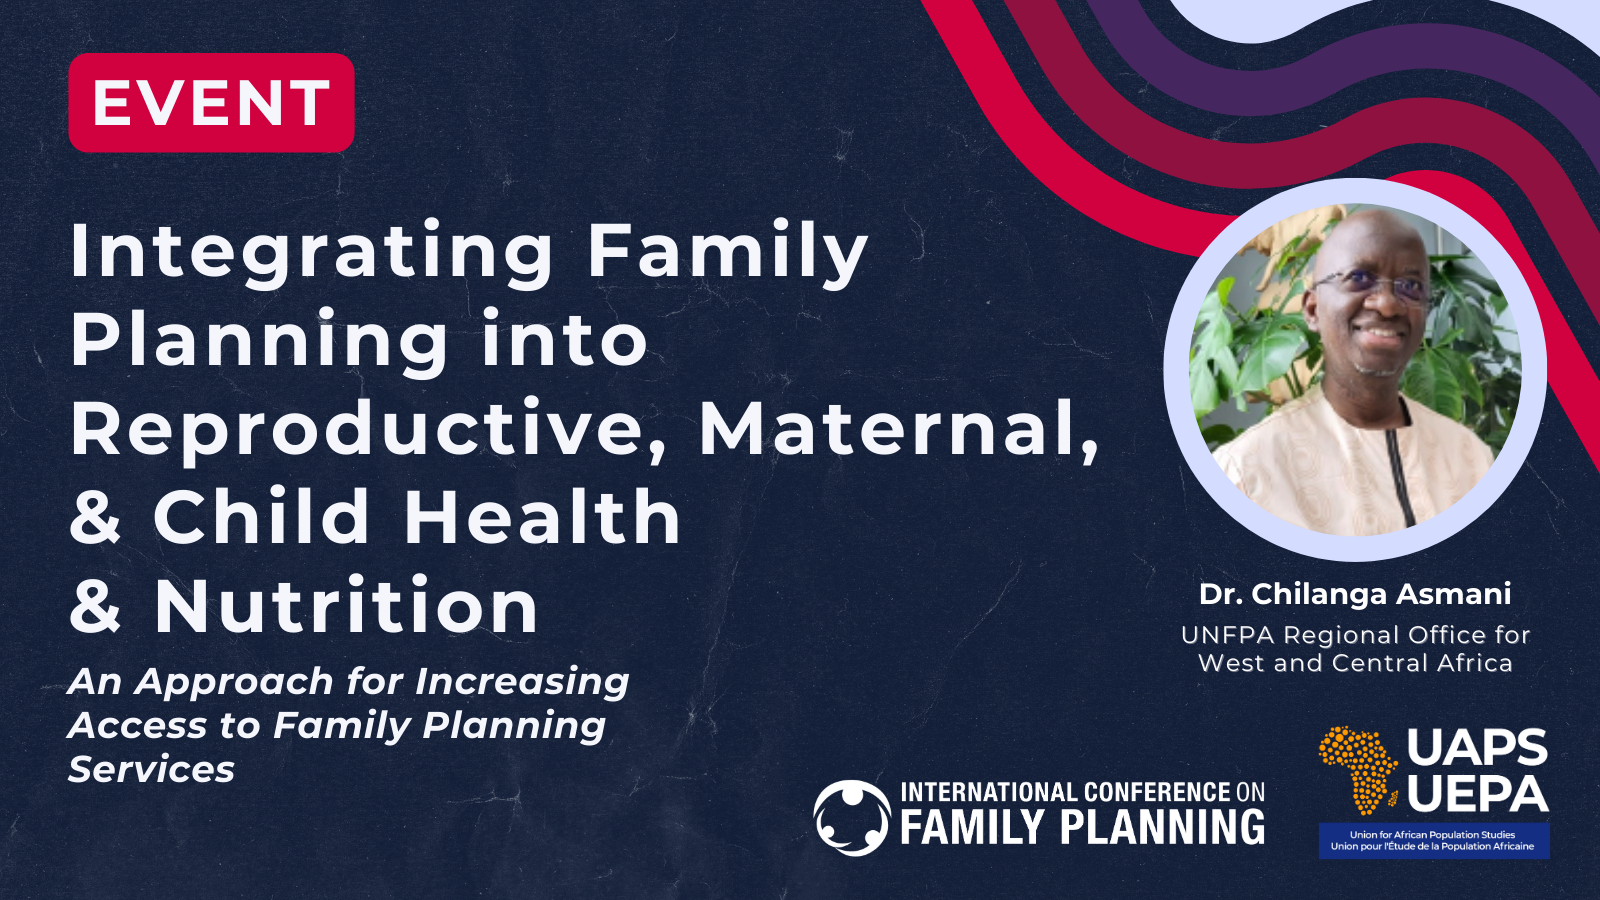 WATCH NOW: Integrating Family Planning into Reproductive, Maternal, and Child Health, and Nutrition